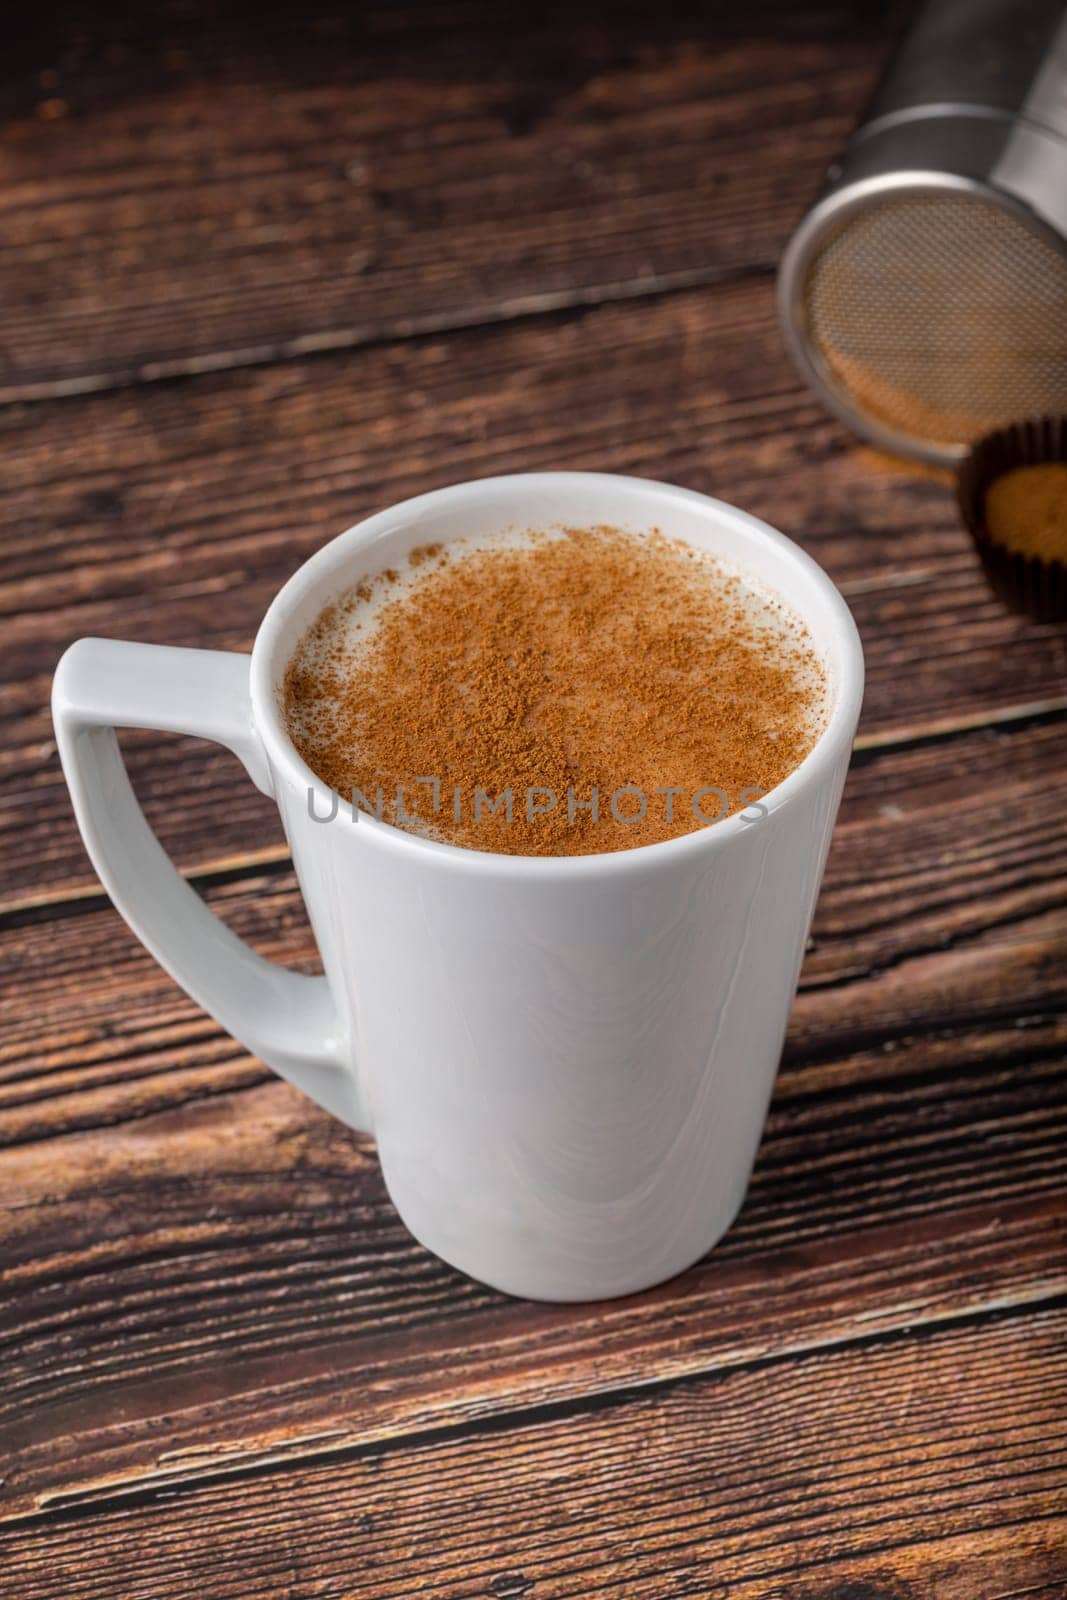 Cinnamon sprinkled salep in a white cup on wooden table by Sonat